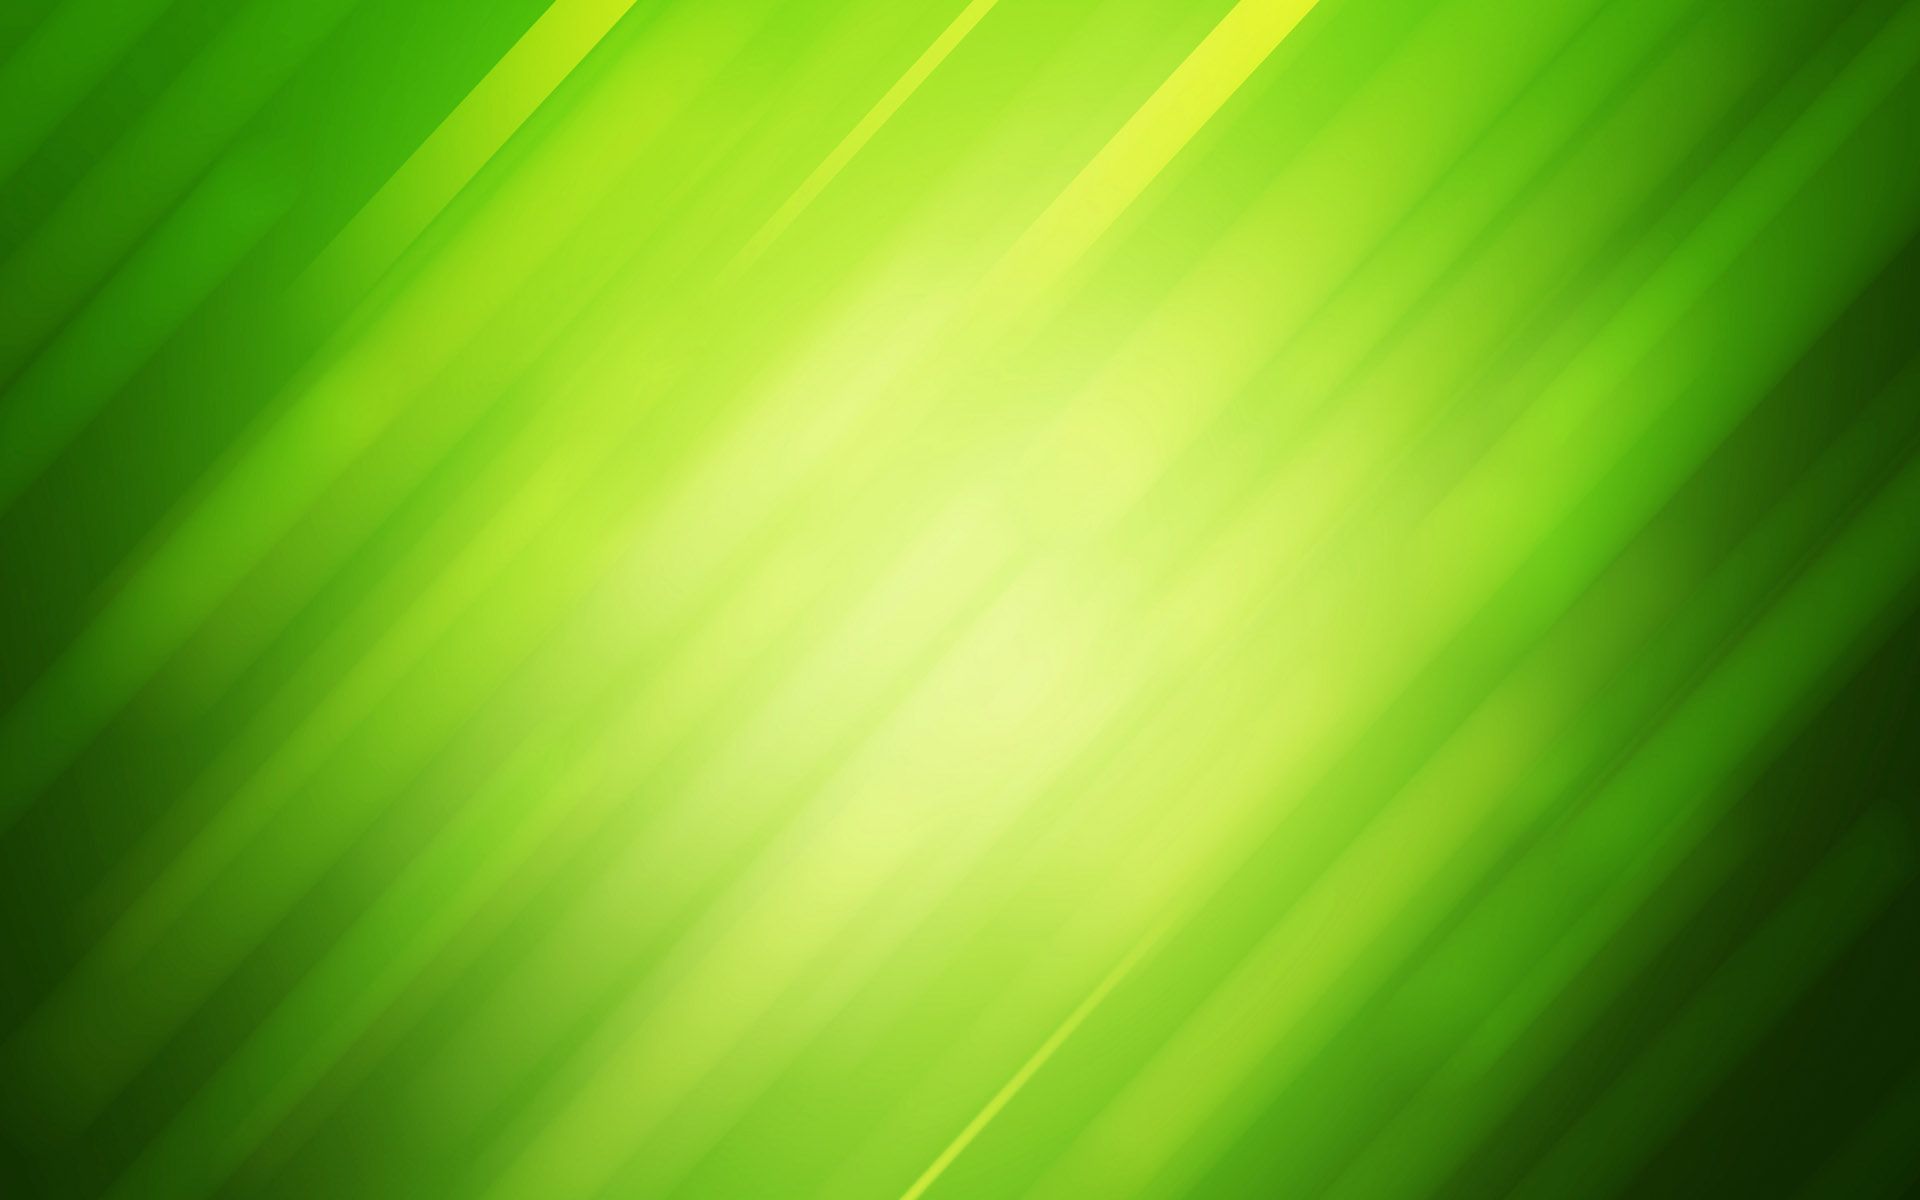 18146486 Green Color Stock Photos Pictures  RoyaltyFree Images   iStock  Green color palette Green color photos Green color background